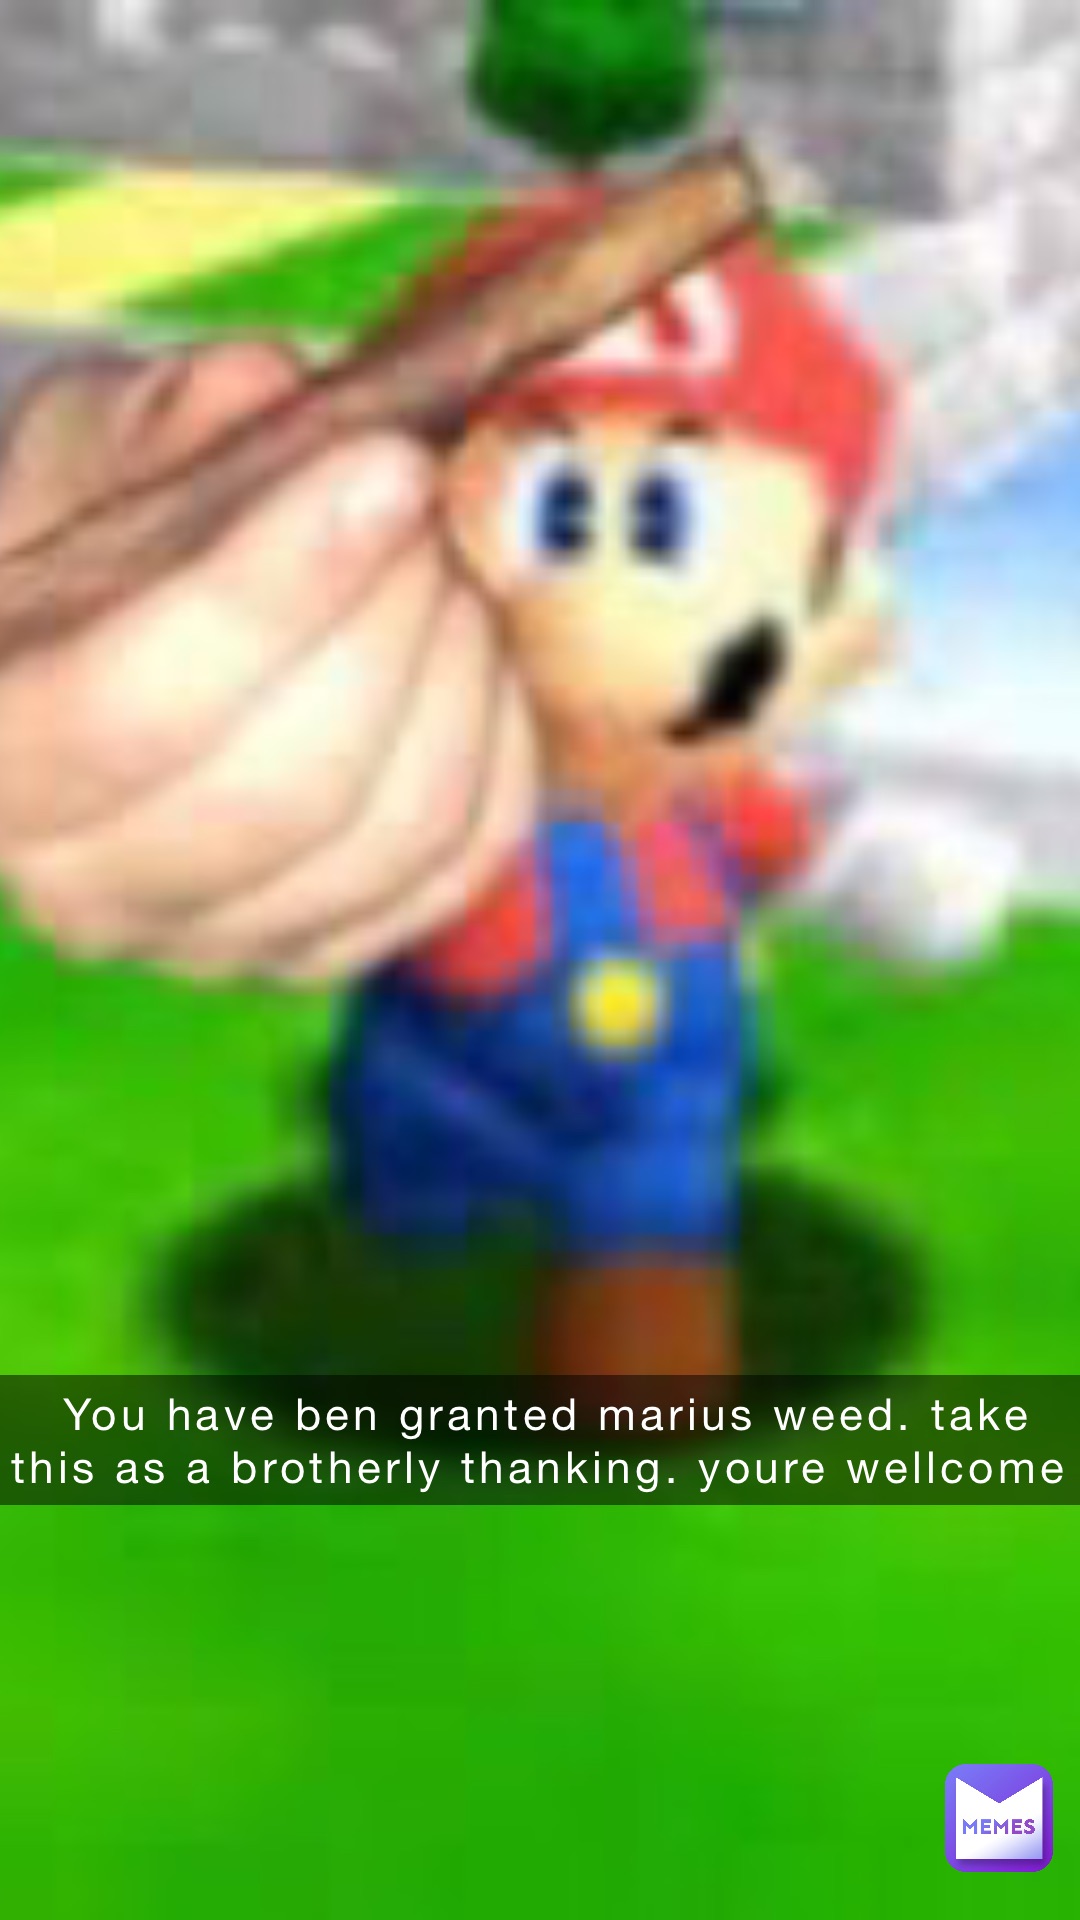 You have ben granted Marius weed. Take this as a brotherly thanking. Youre wellcome